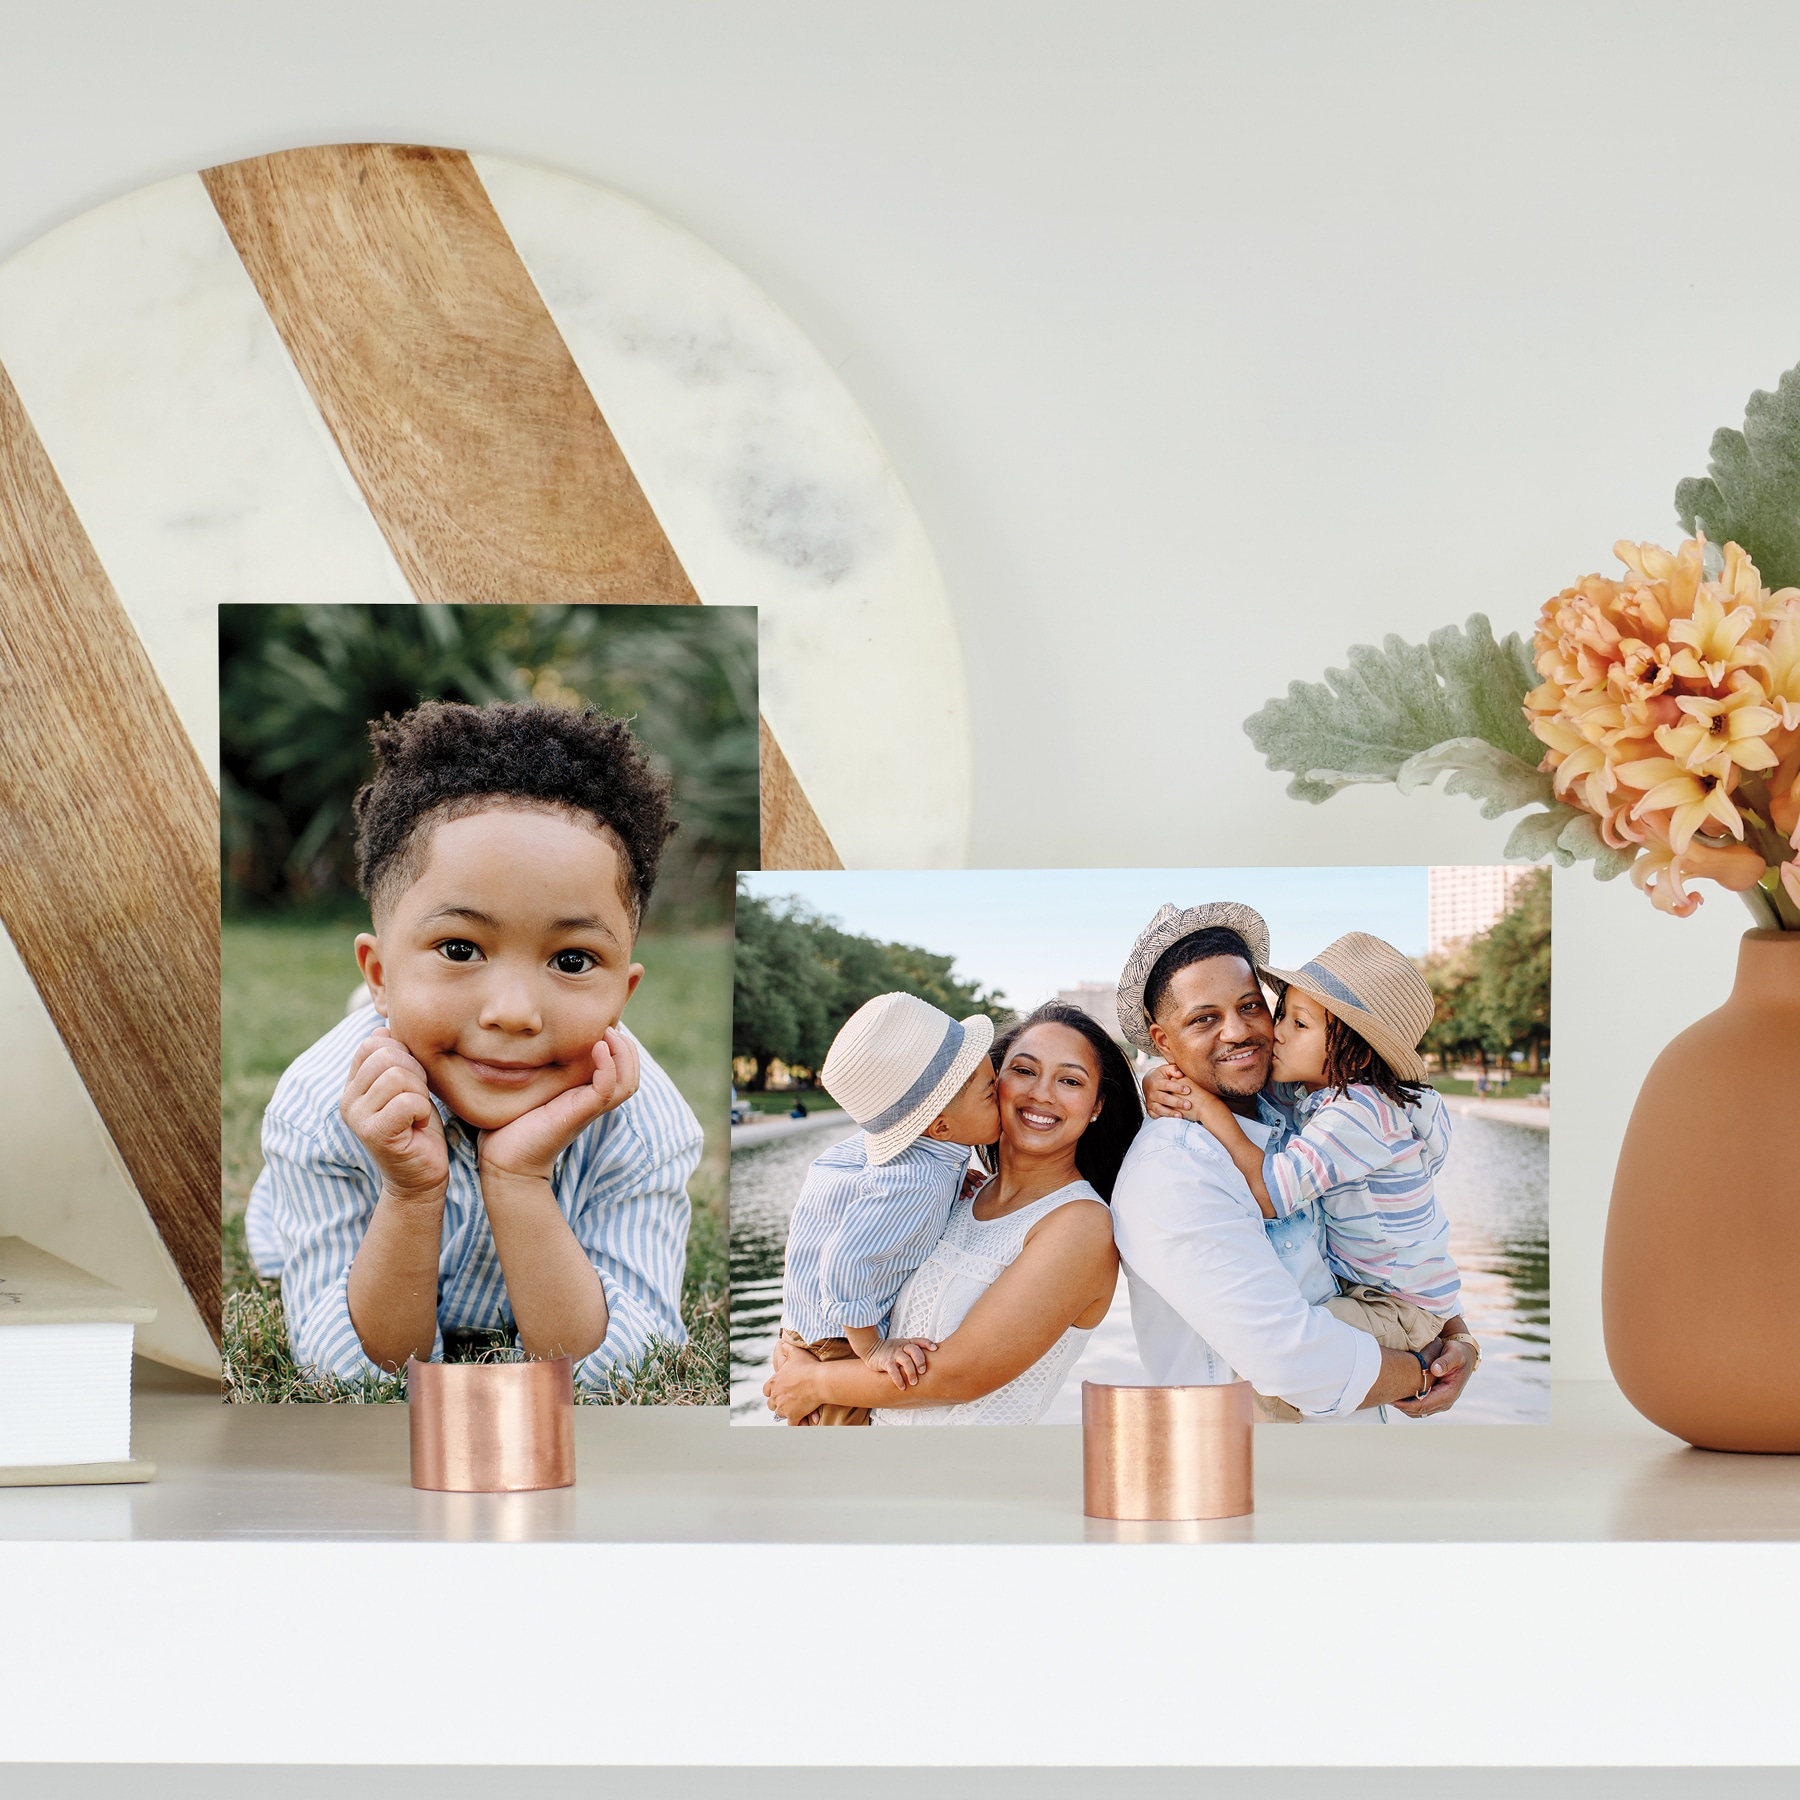 Update your home this Spring with personalized home décor